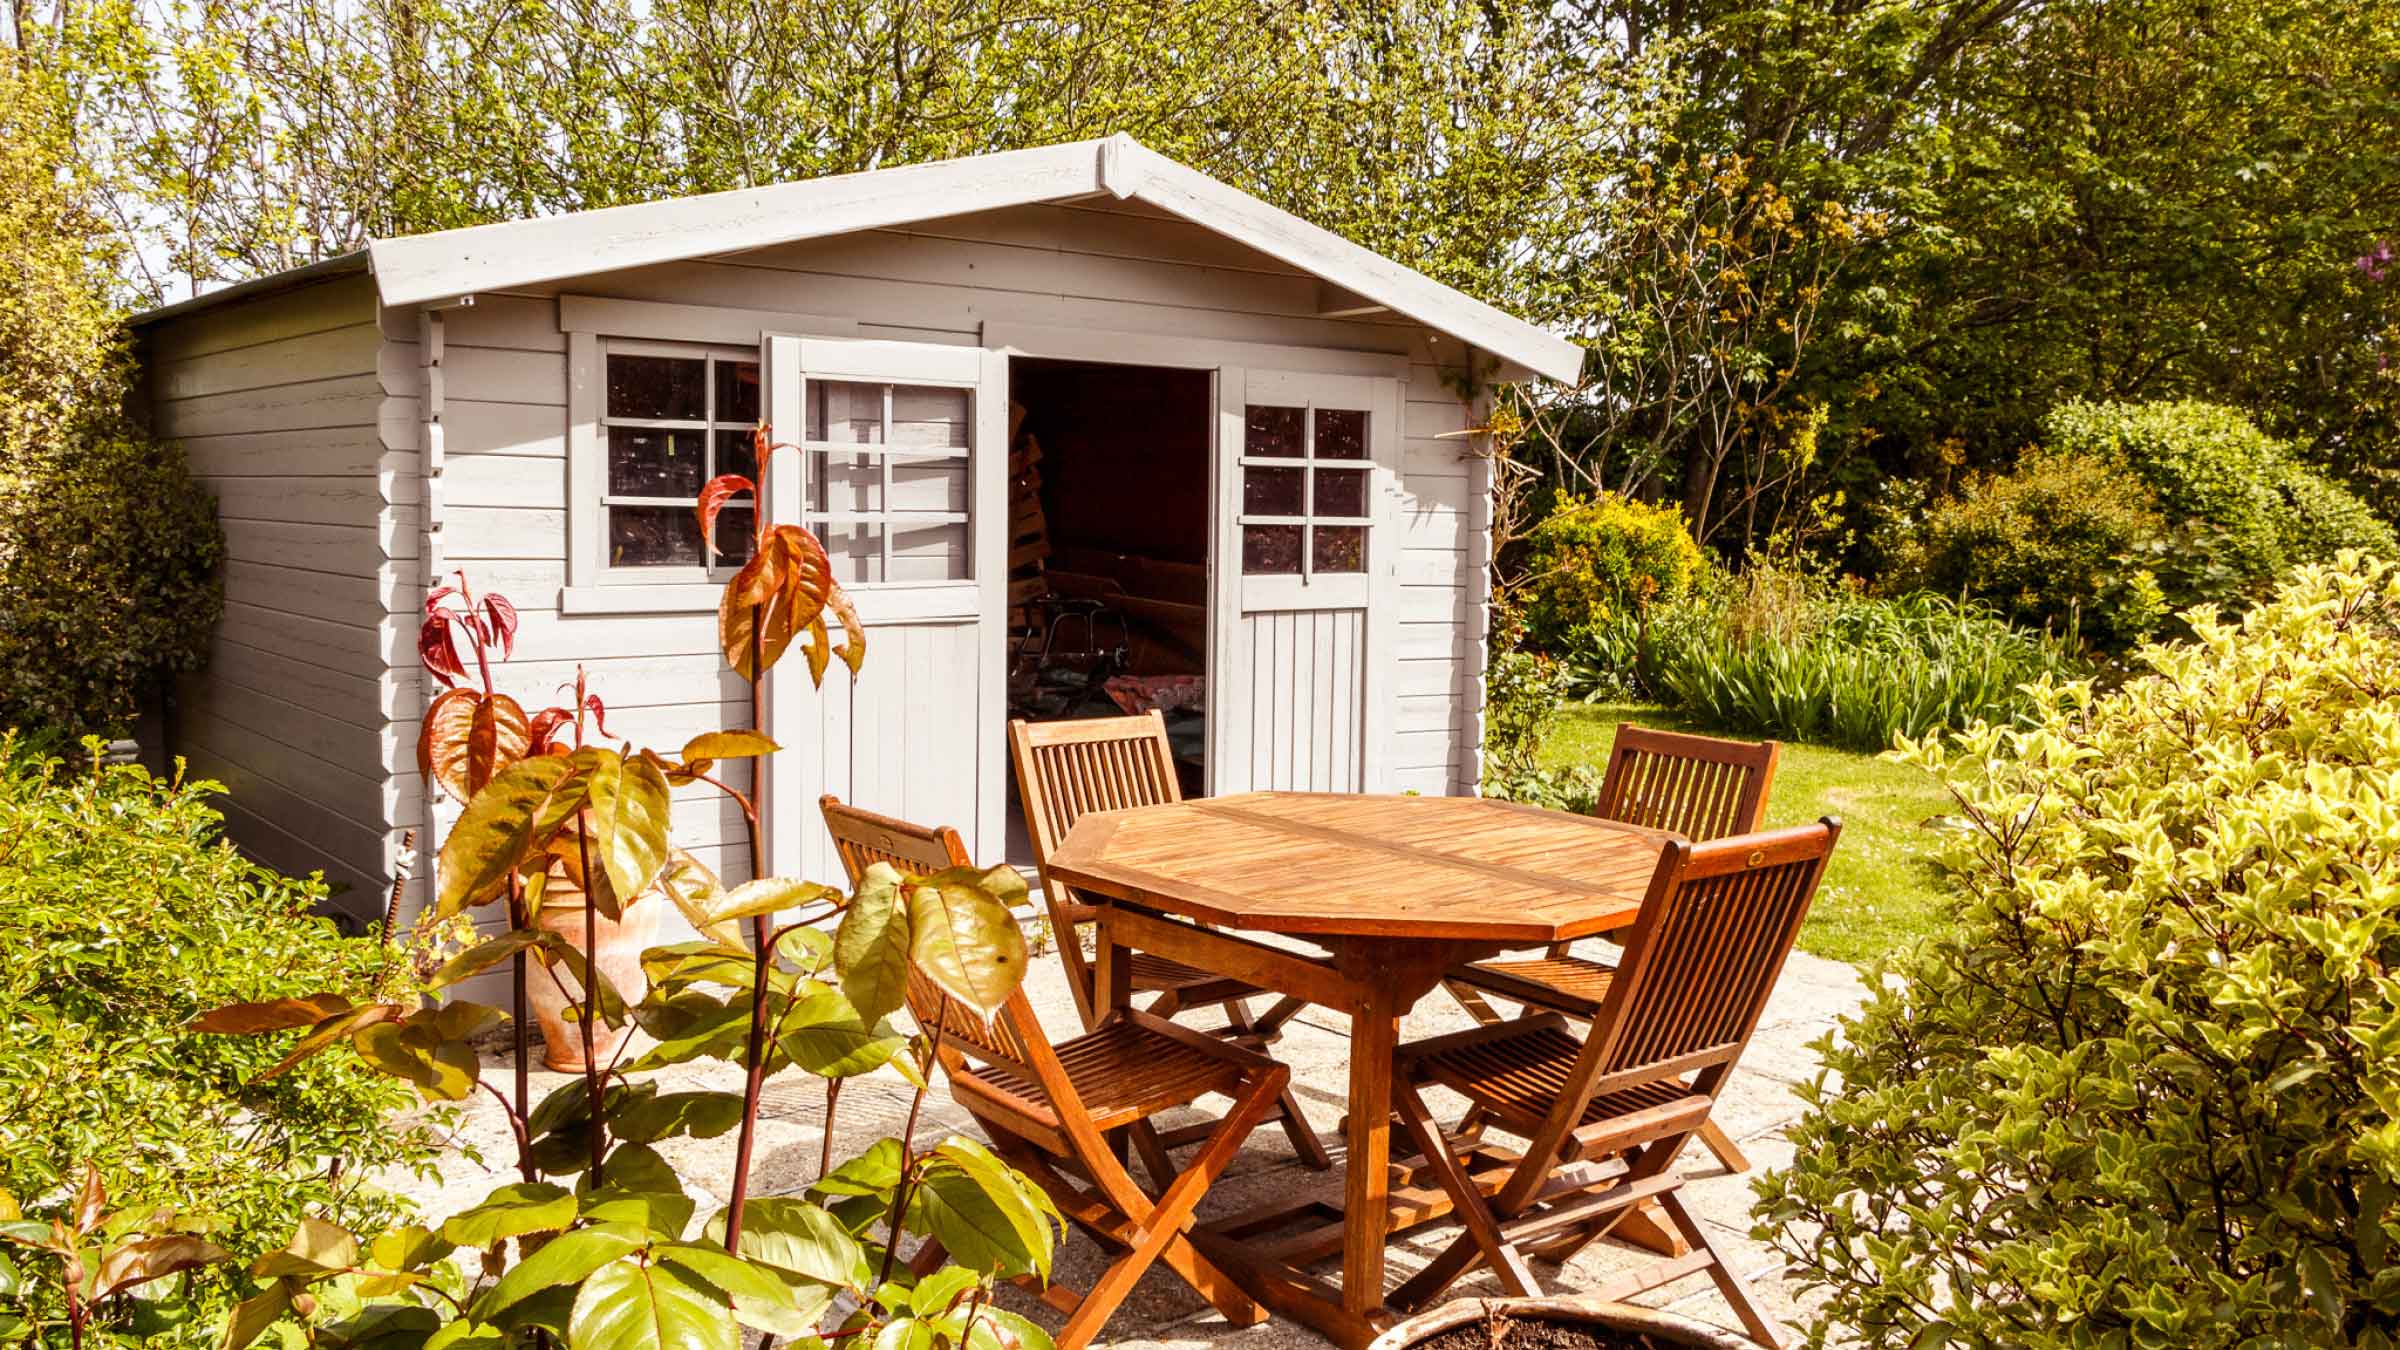 Garden shed surrounded by greenery, it's door is wide open, and there's a table and chairs in front of it.